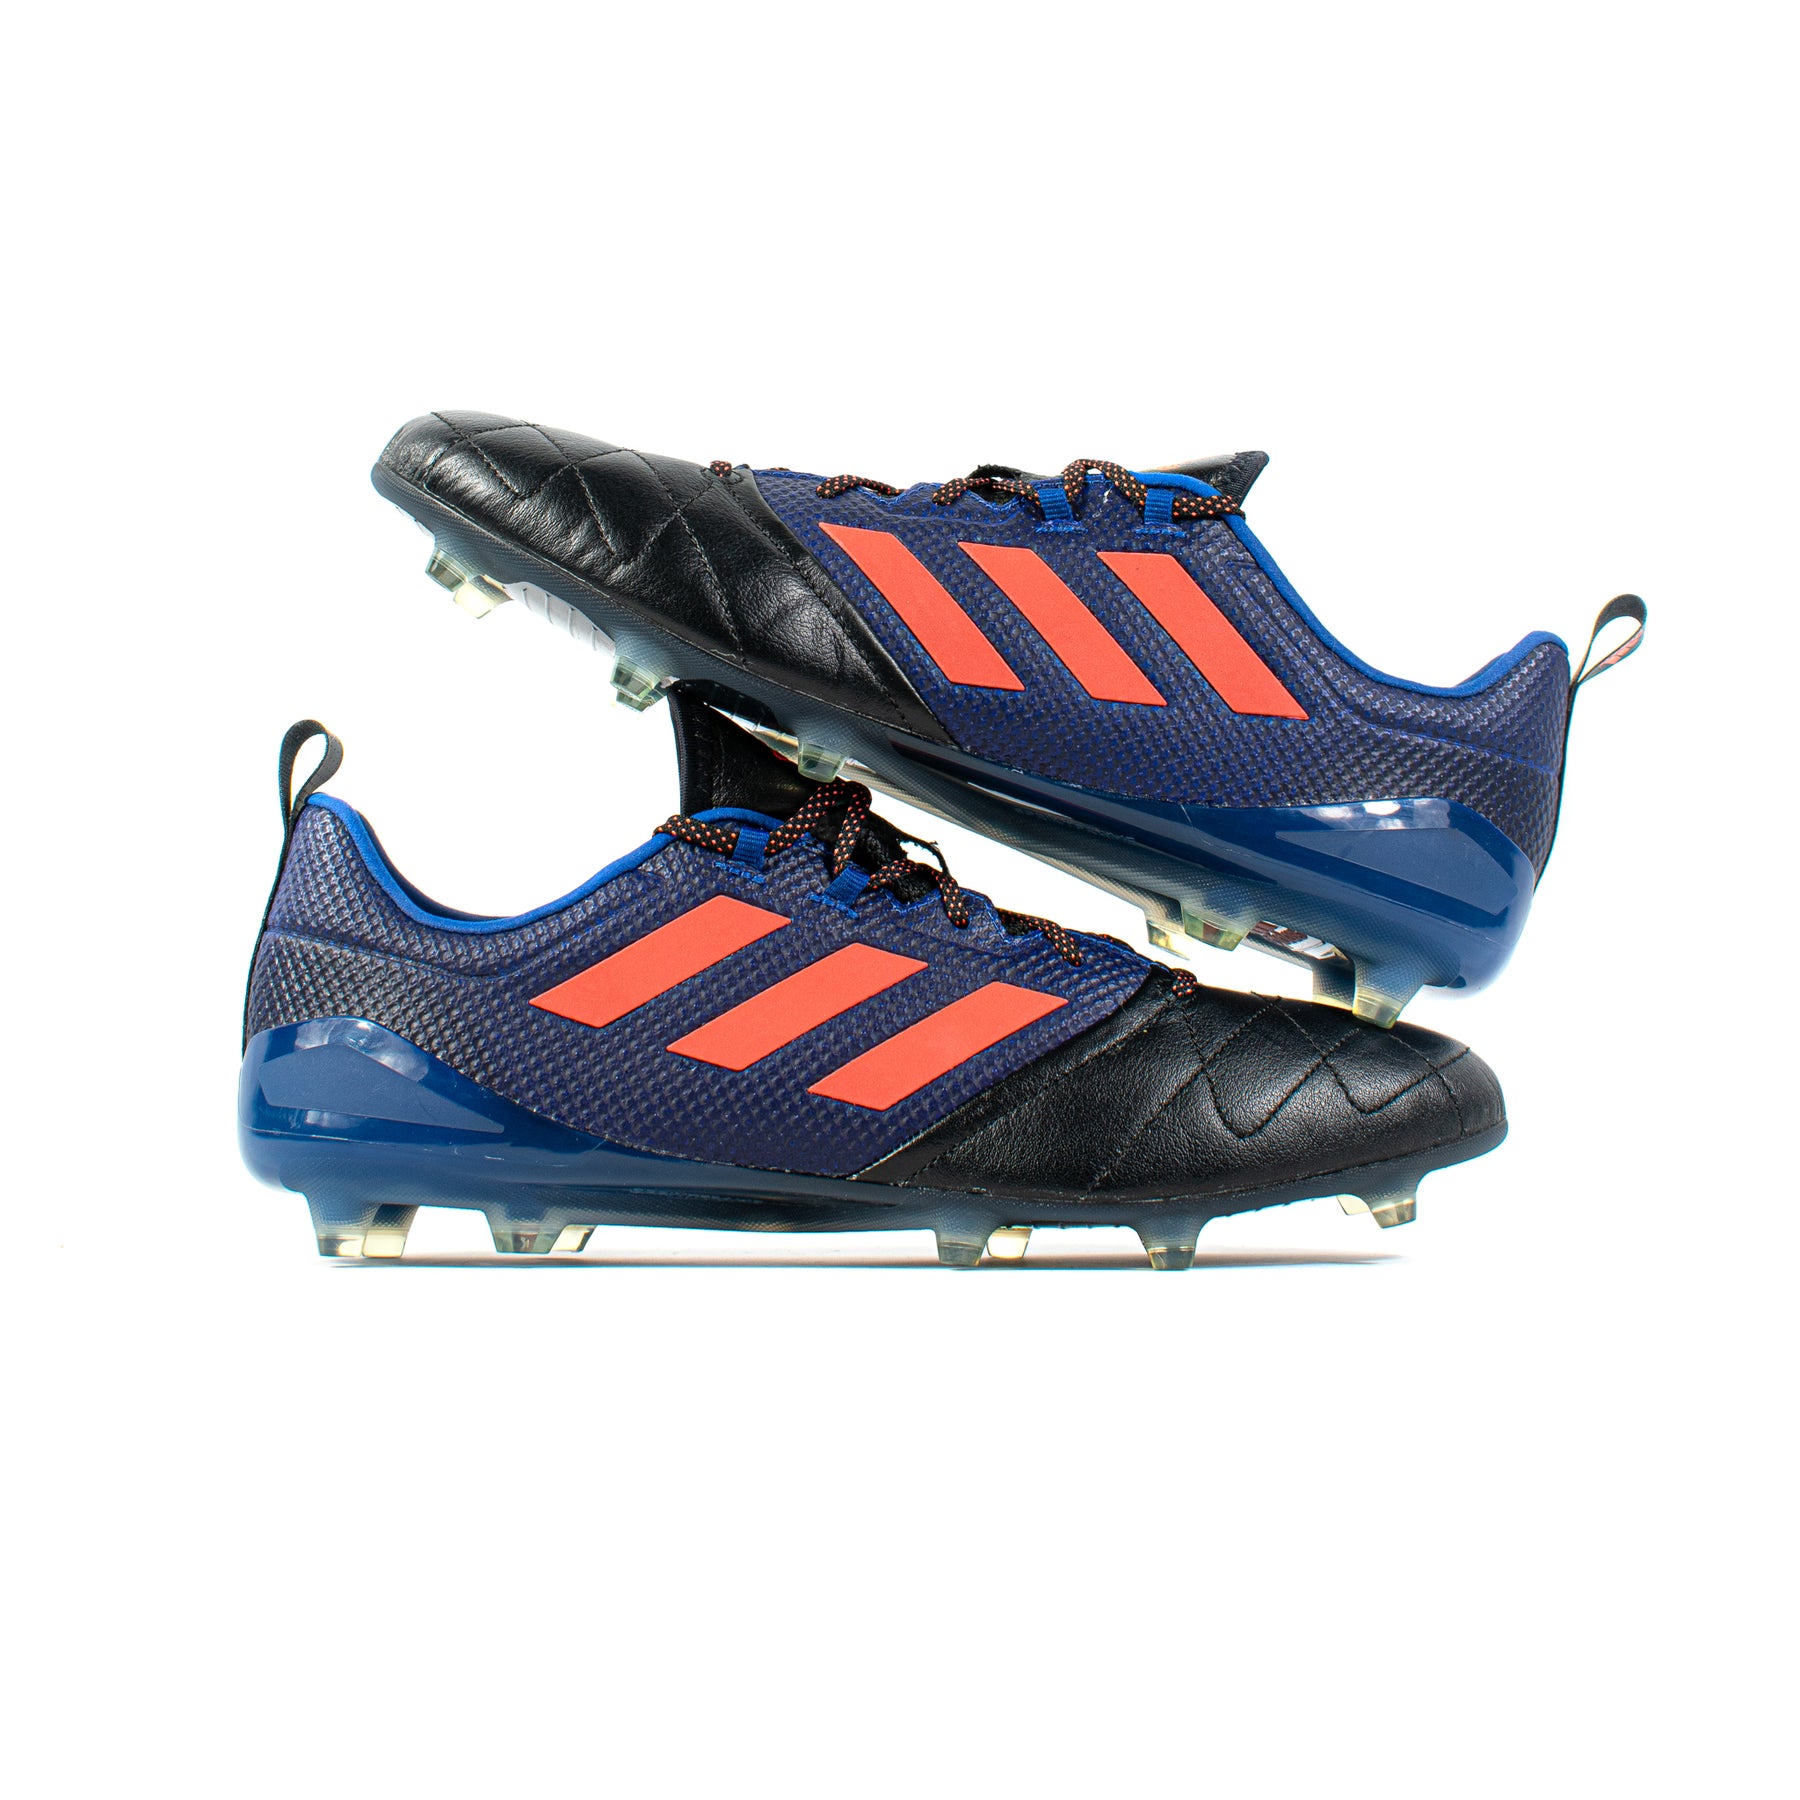 Adidas Ace 17.1 Leather Black Blue – Classic Soccer Cleats